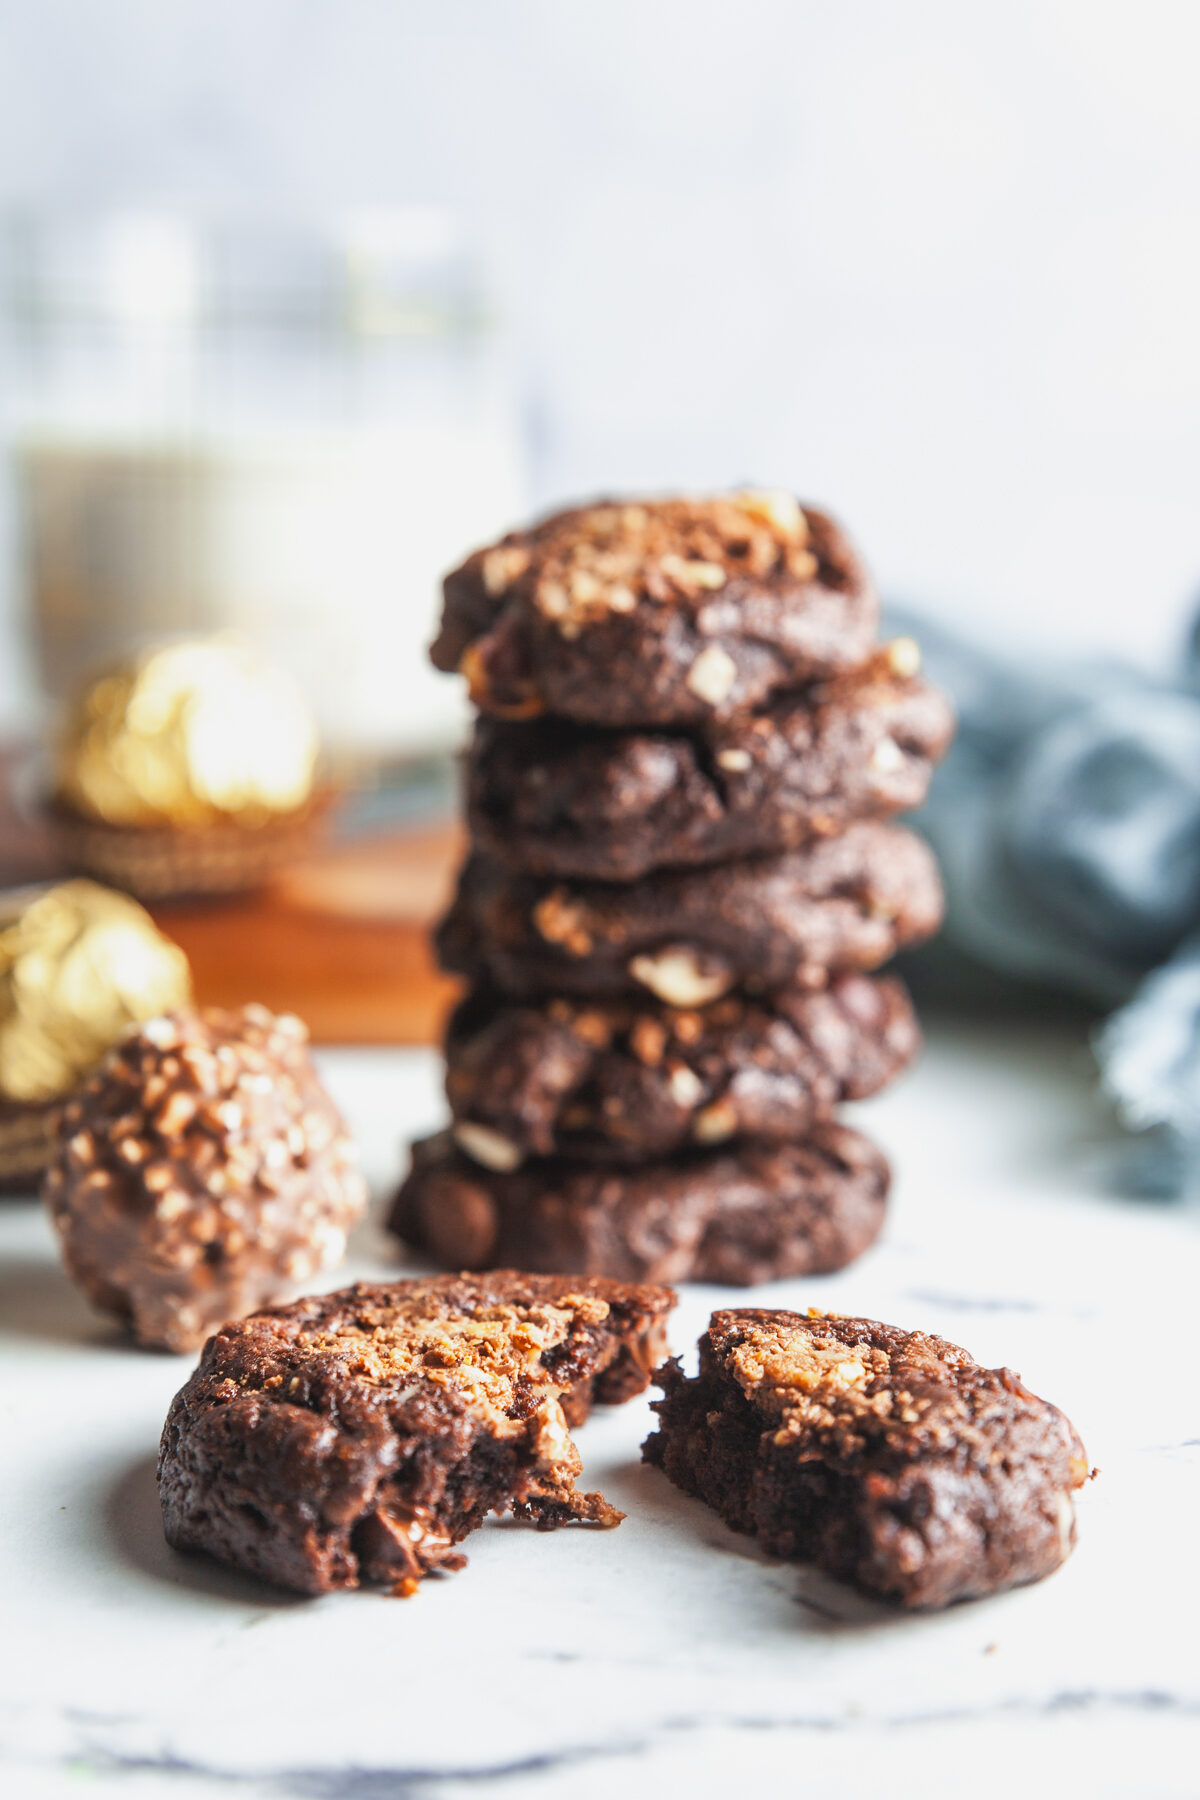 Stack of chocolate hazelnut cookies with a glass of milk and ferrero rocher candies.